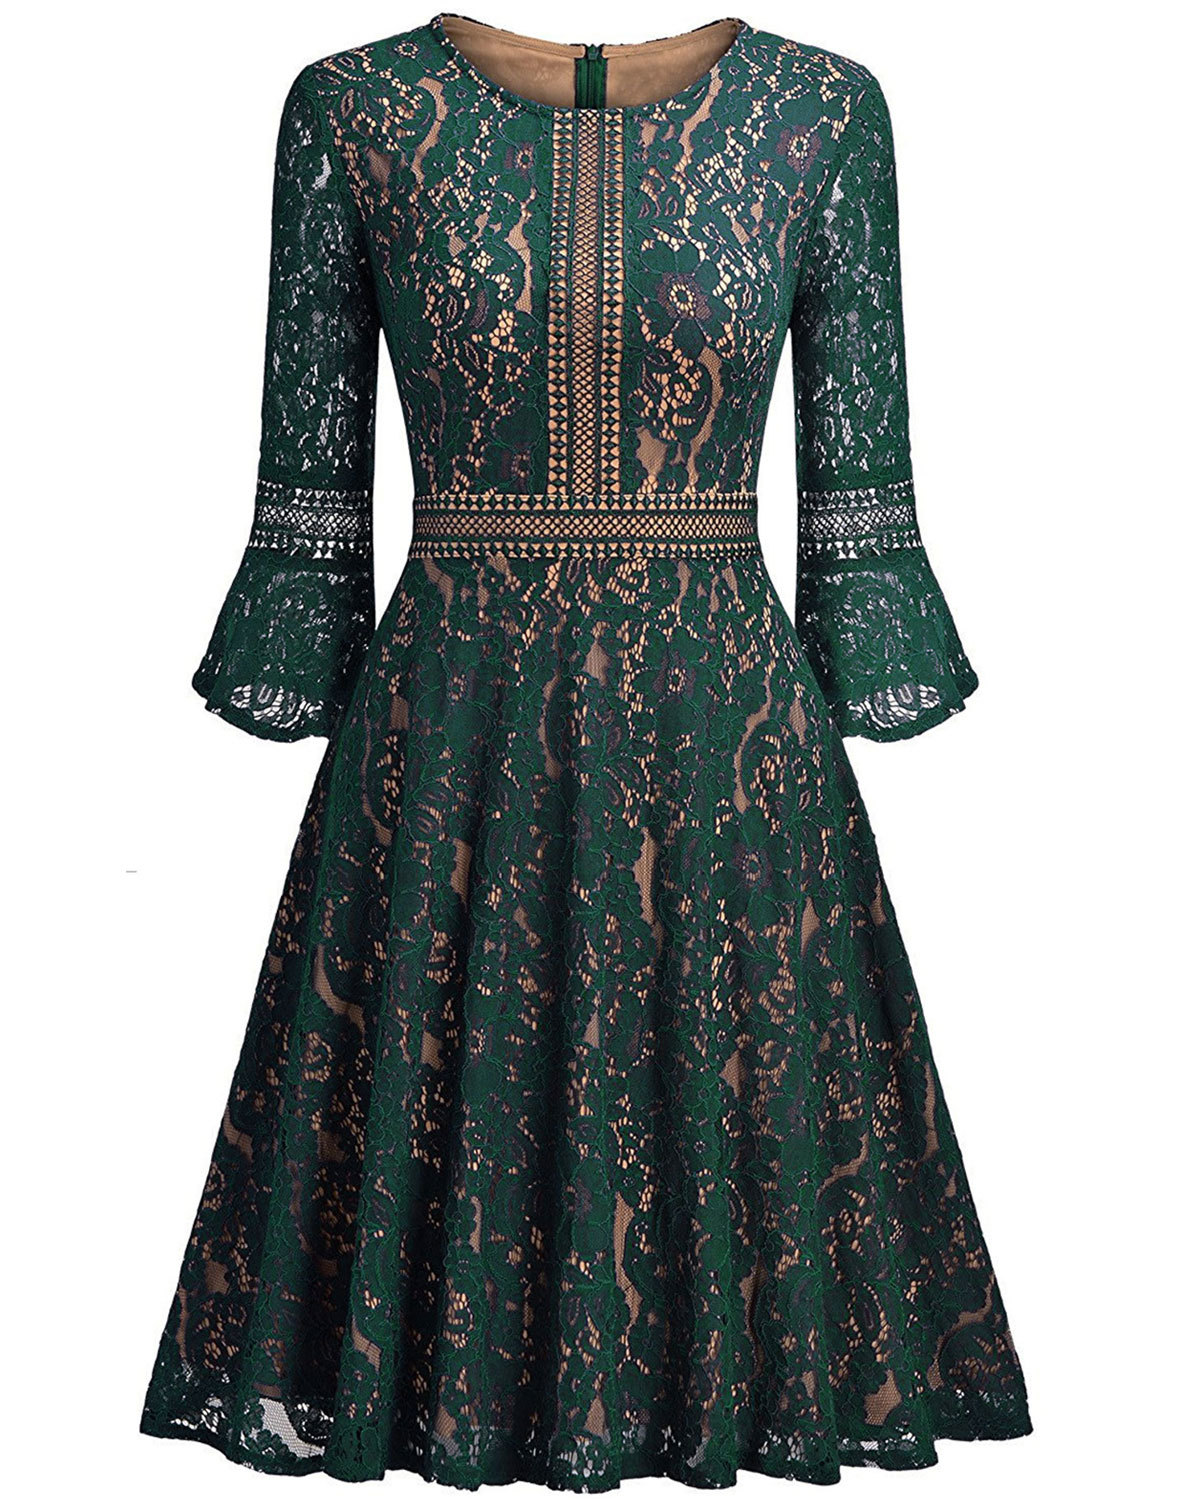 Vintage Floral Lace Dress Casual Women 3/4 Flare Sleeve Short Cocktail Evening Party Wear Big Swing Dress hunter green